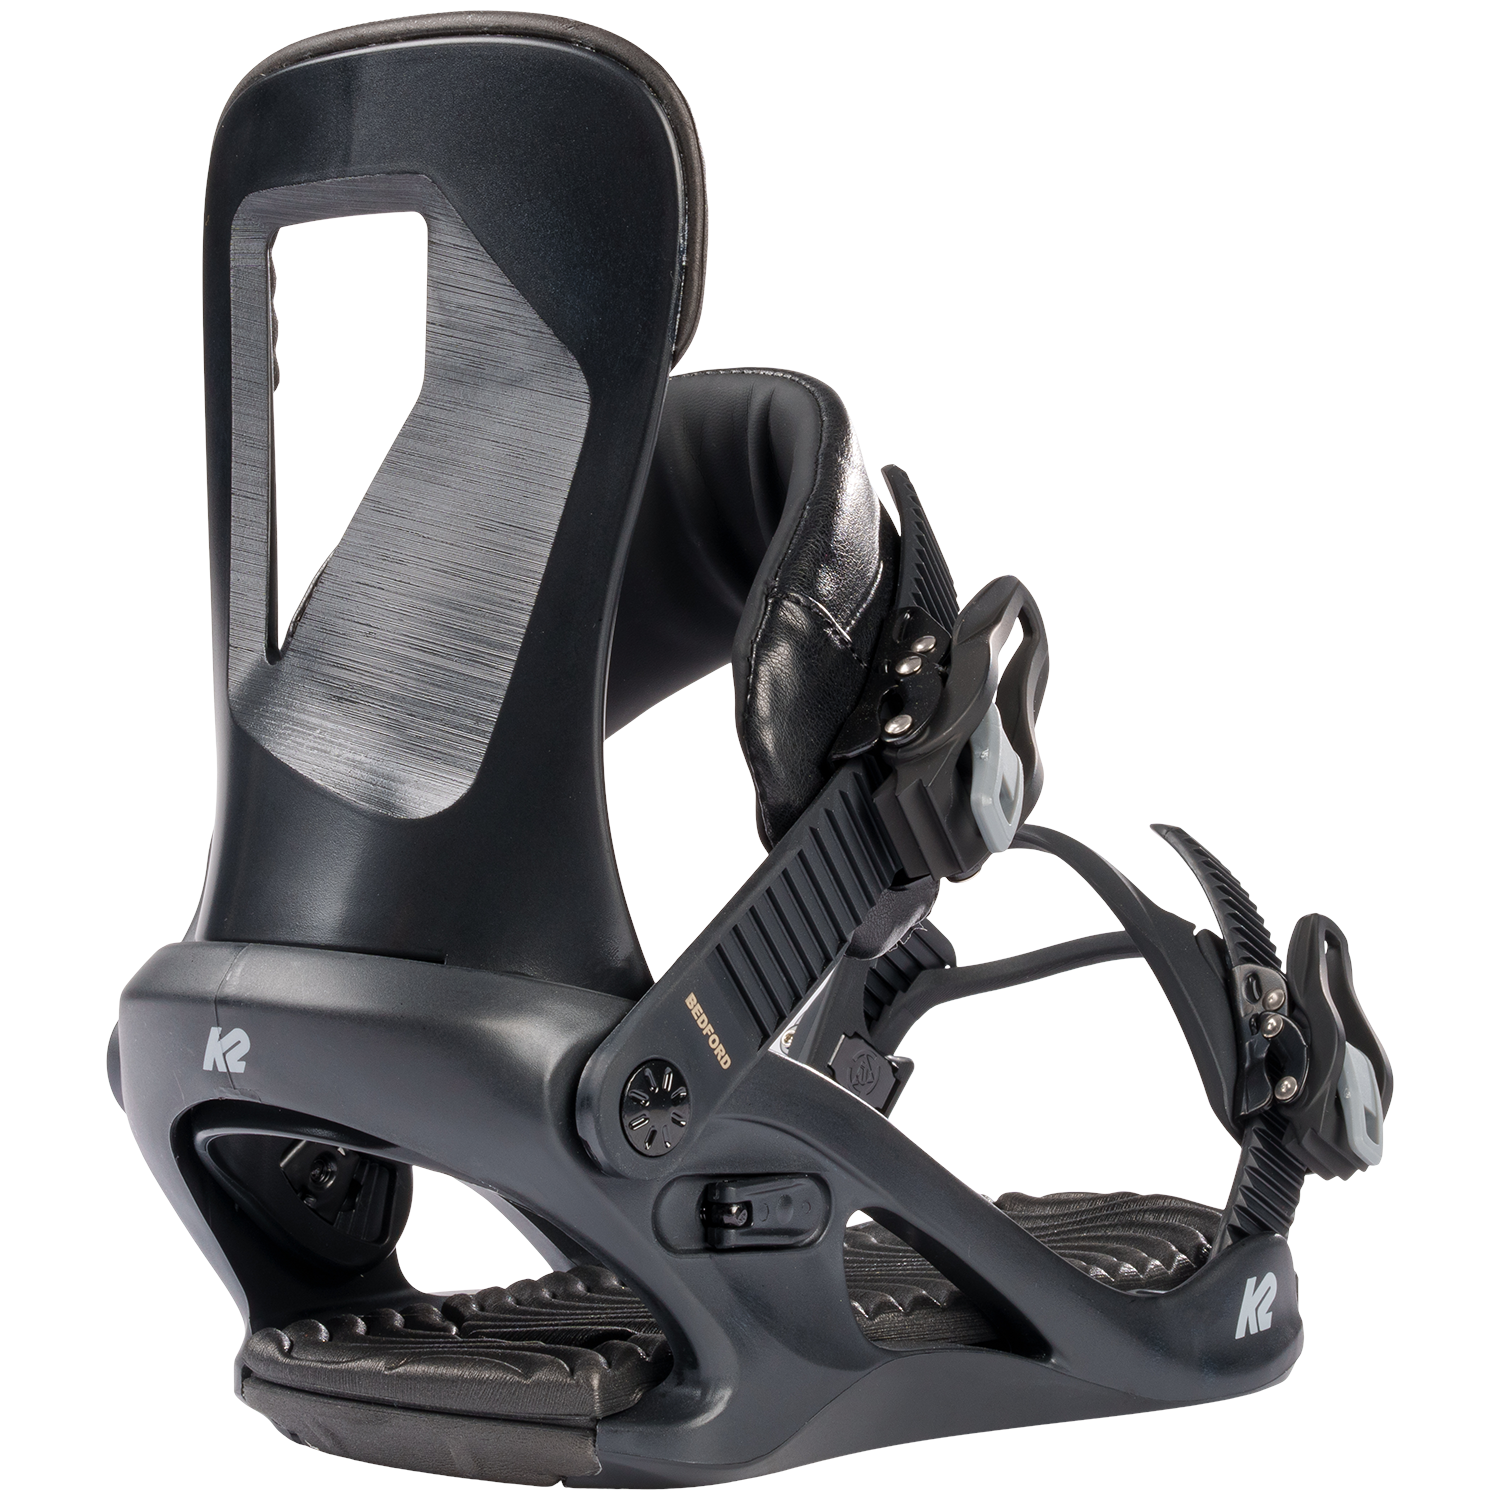 K2 Snowboard Bindings - Toothed Toe Ladder Straps - Black with